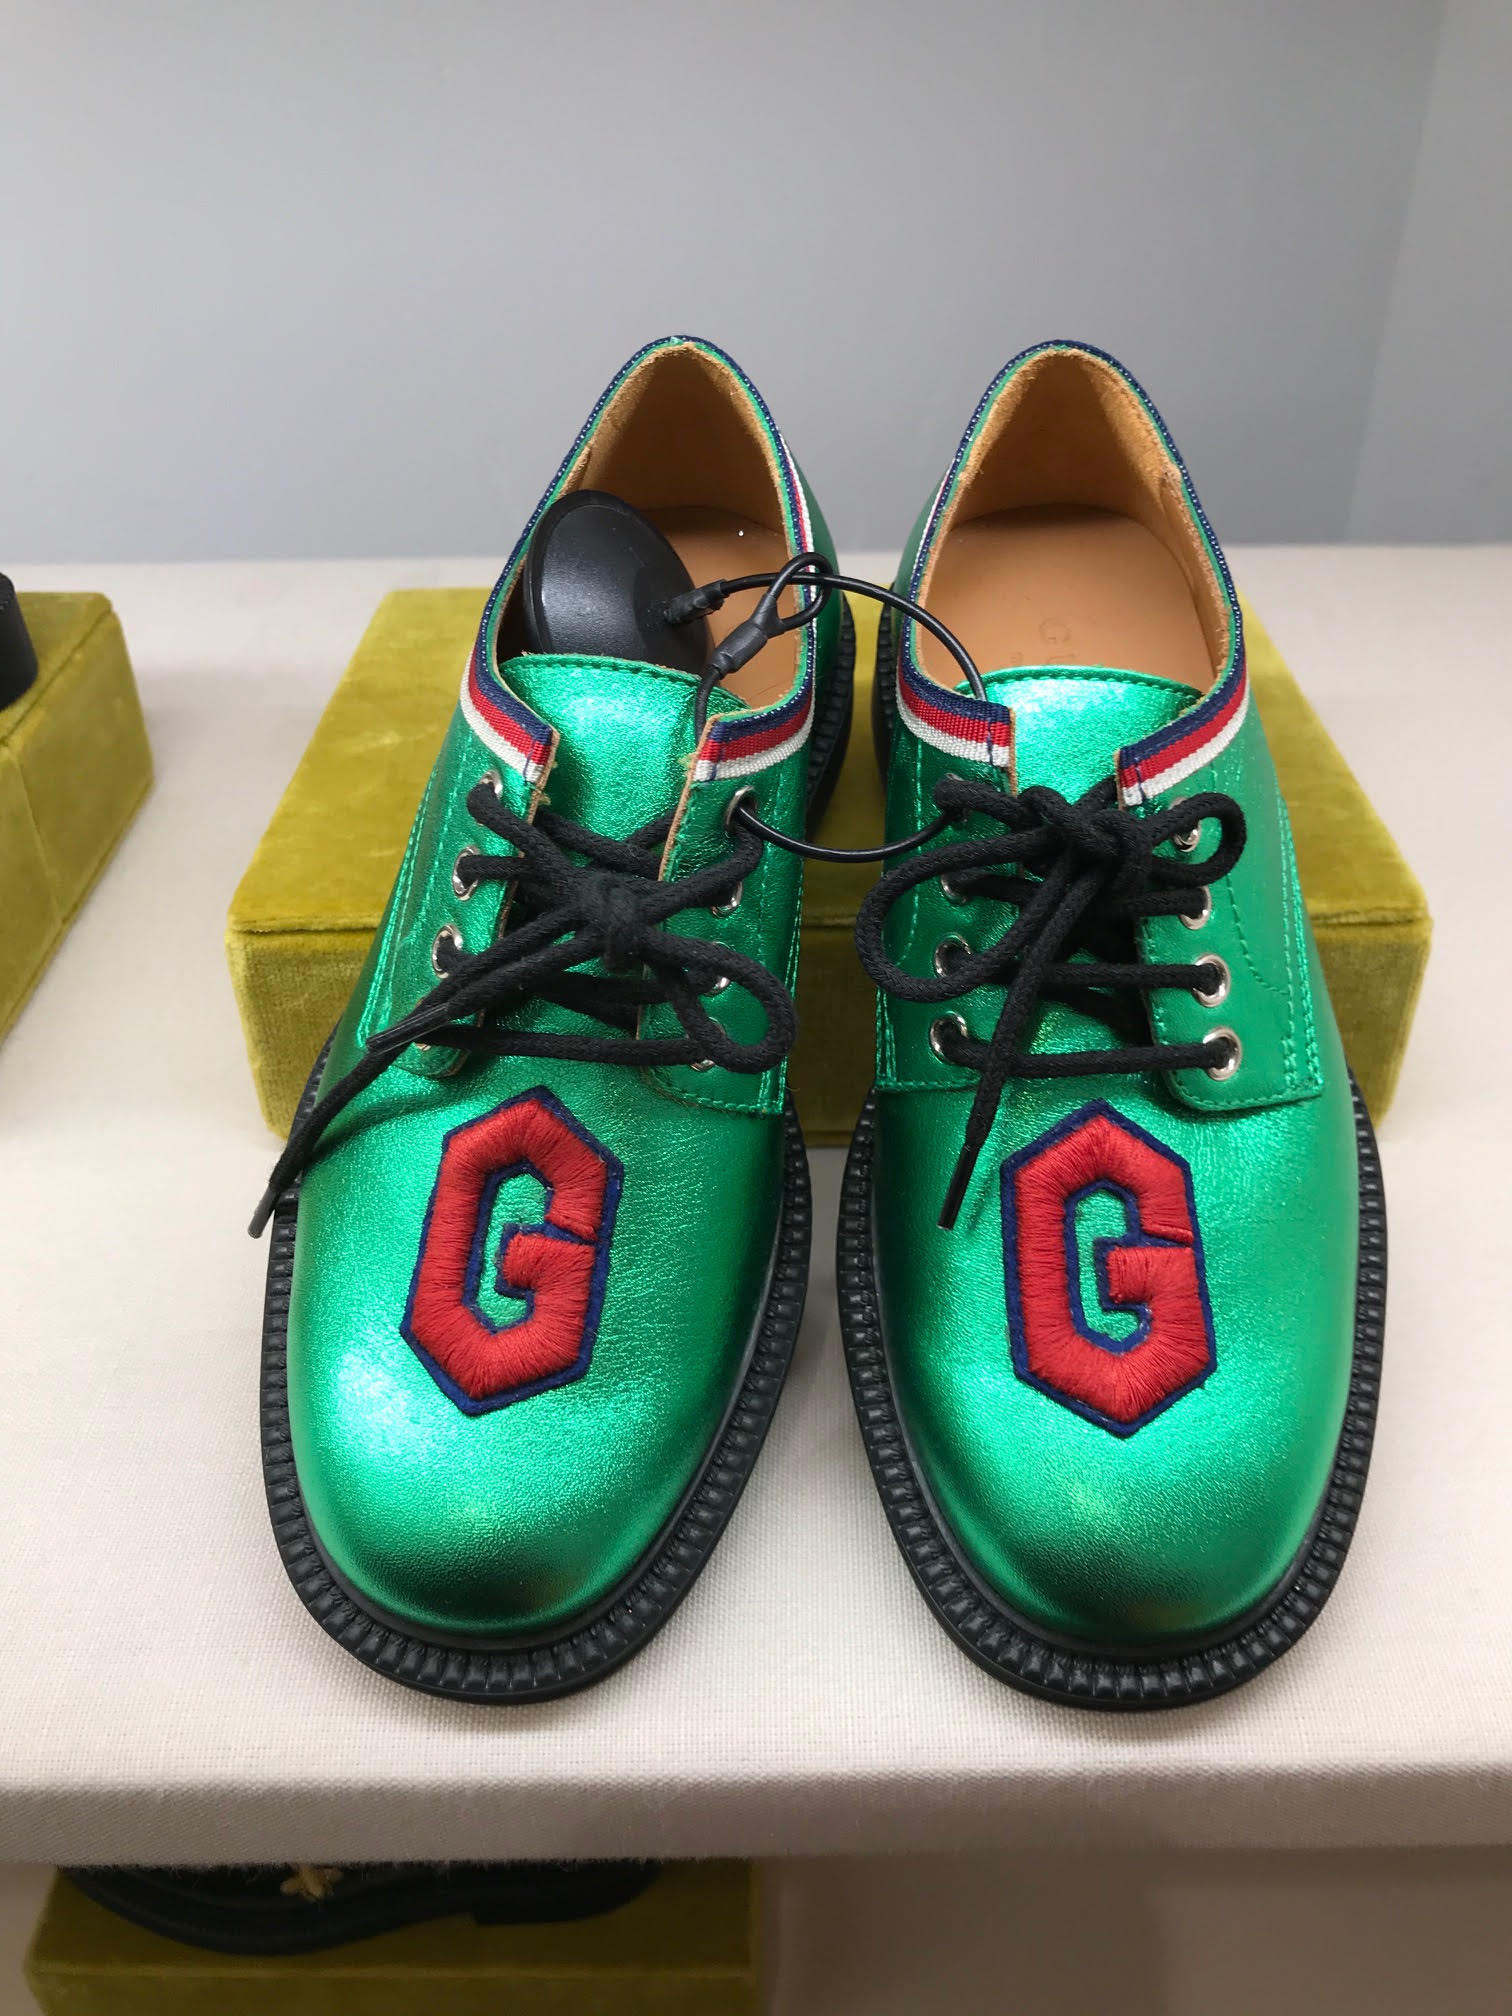 Metallic Leather Gucci Shoes for Toddlers found while shopping at Harrods on TravelSquire